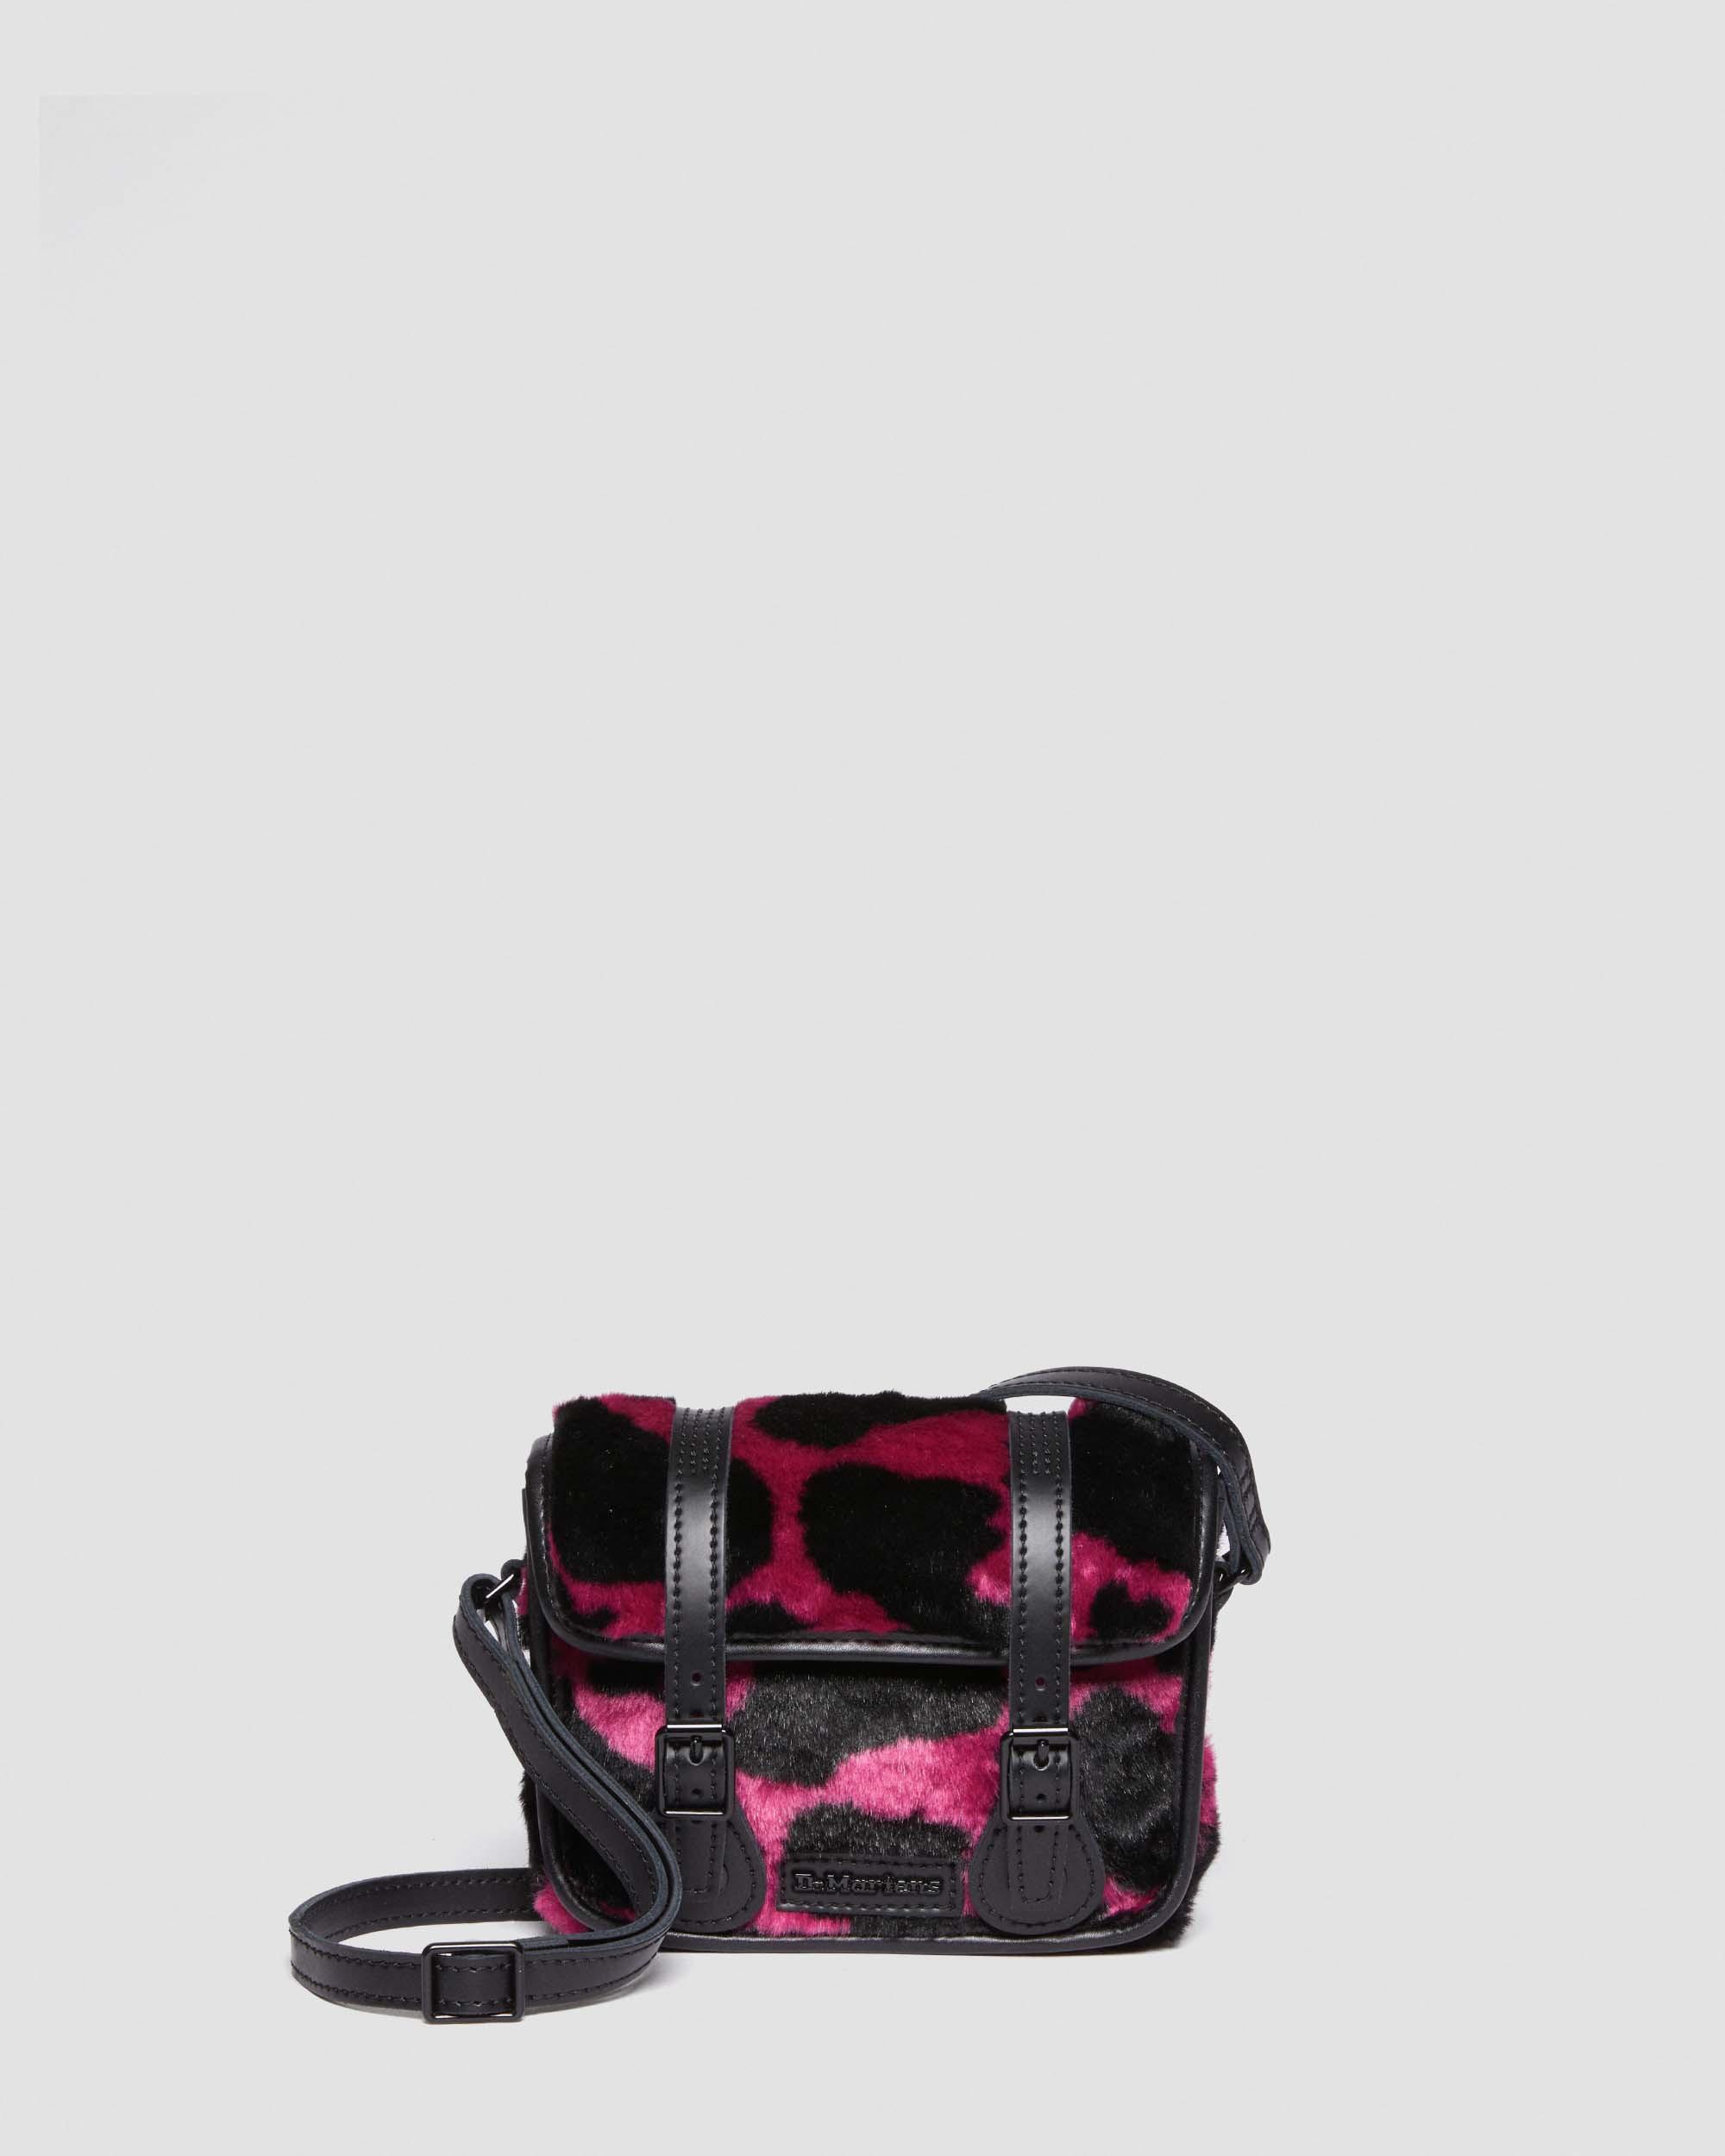 7 Inch Hair-On Cow Print Crossbody Bag in THRIFT PINK+BLACK